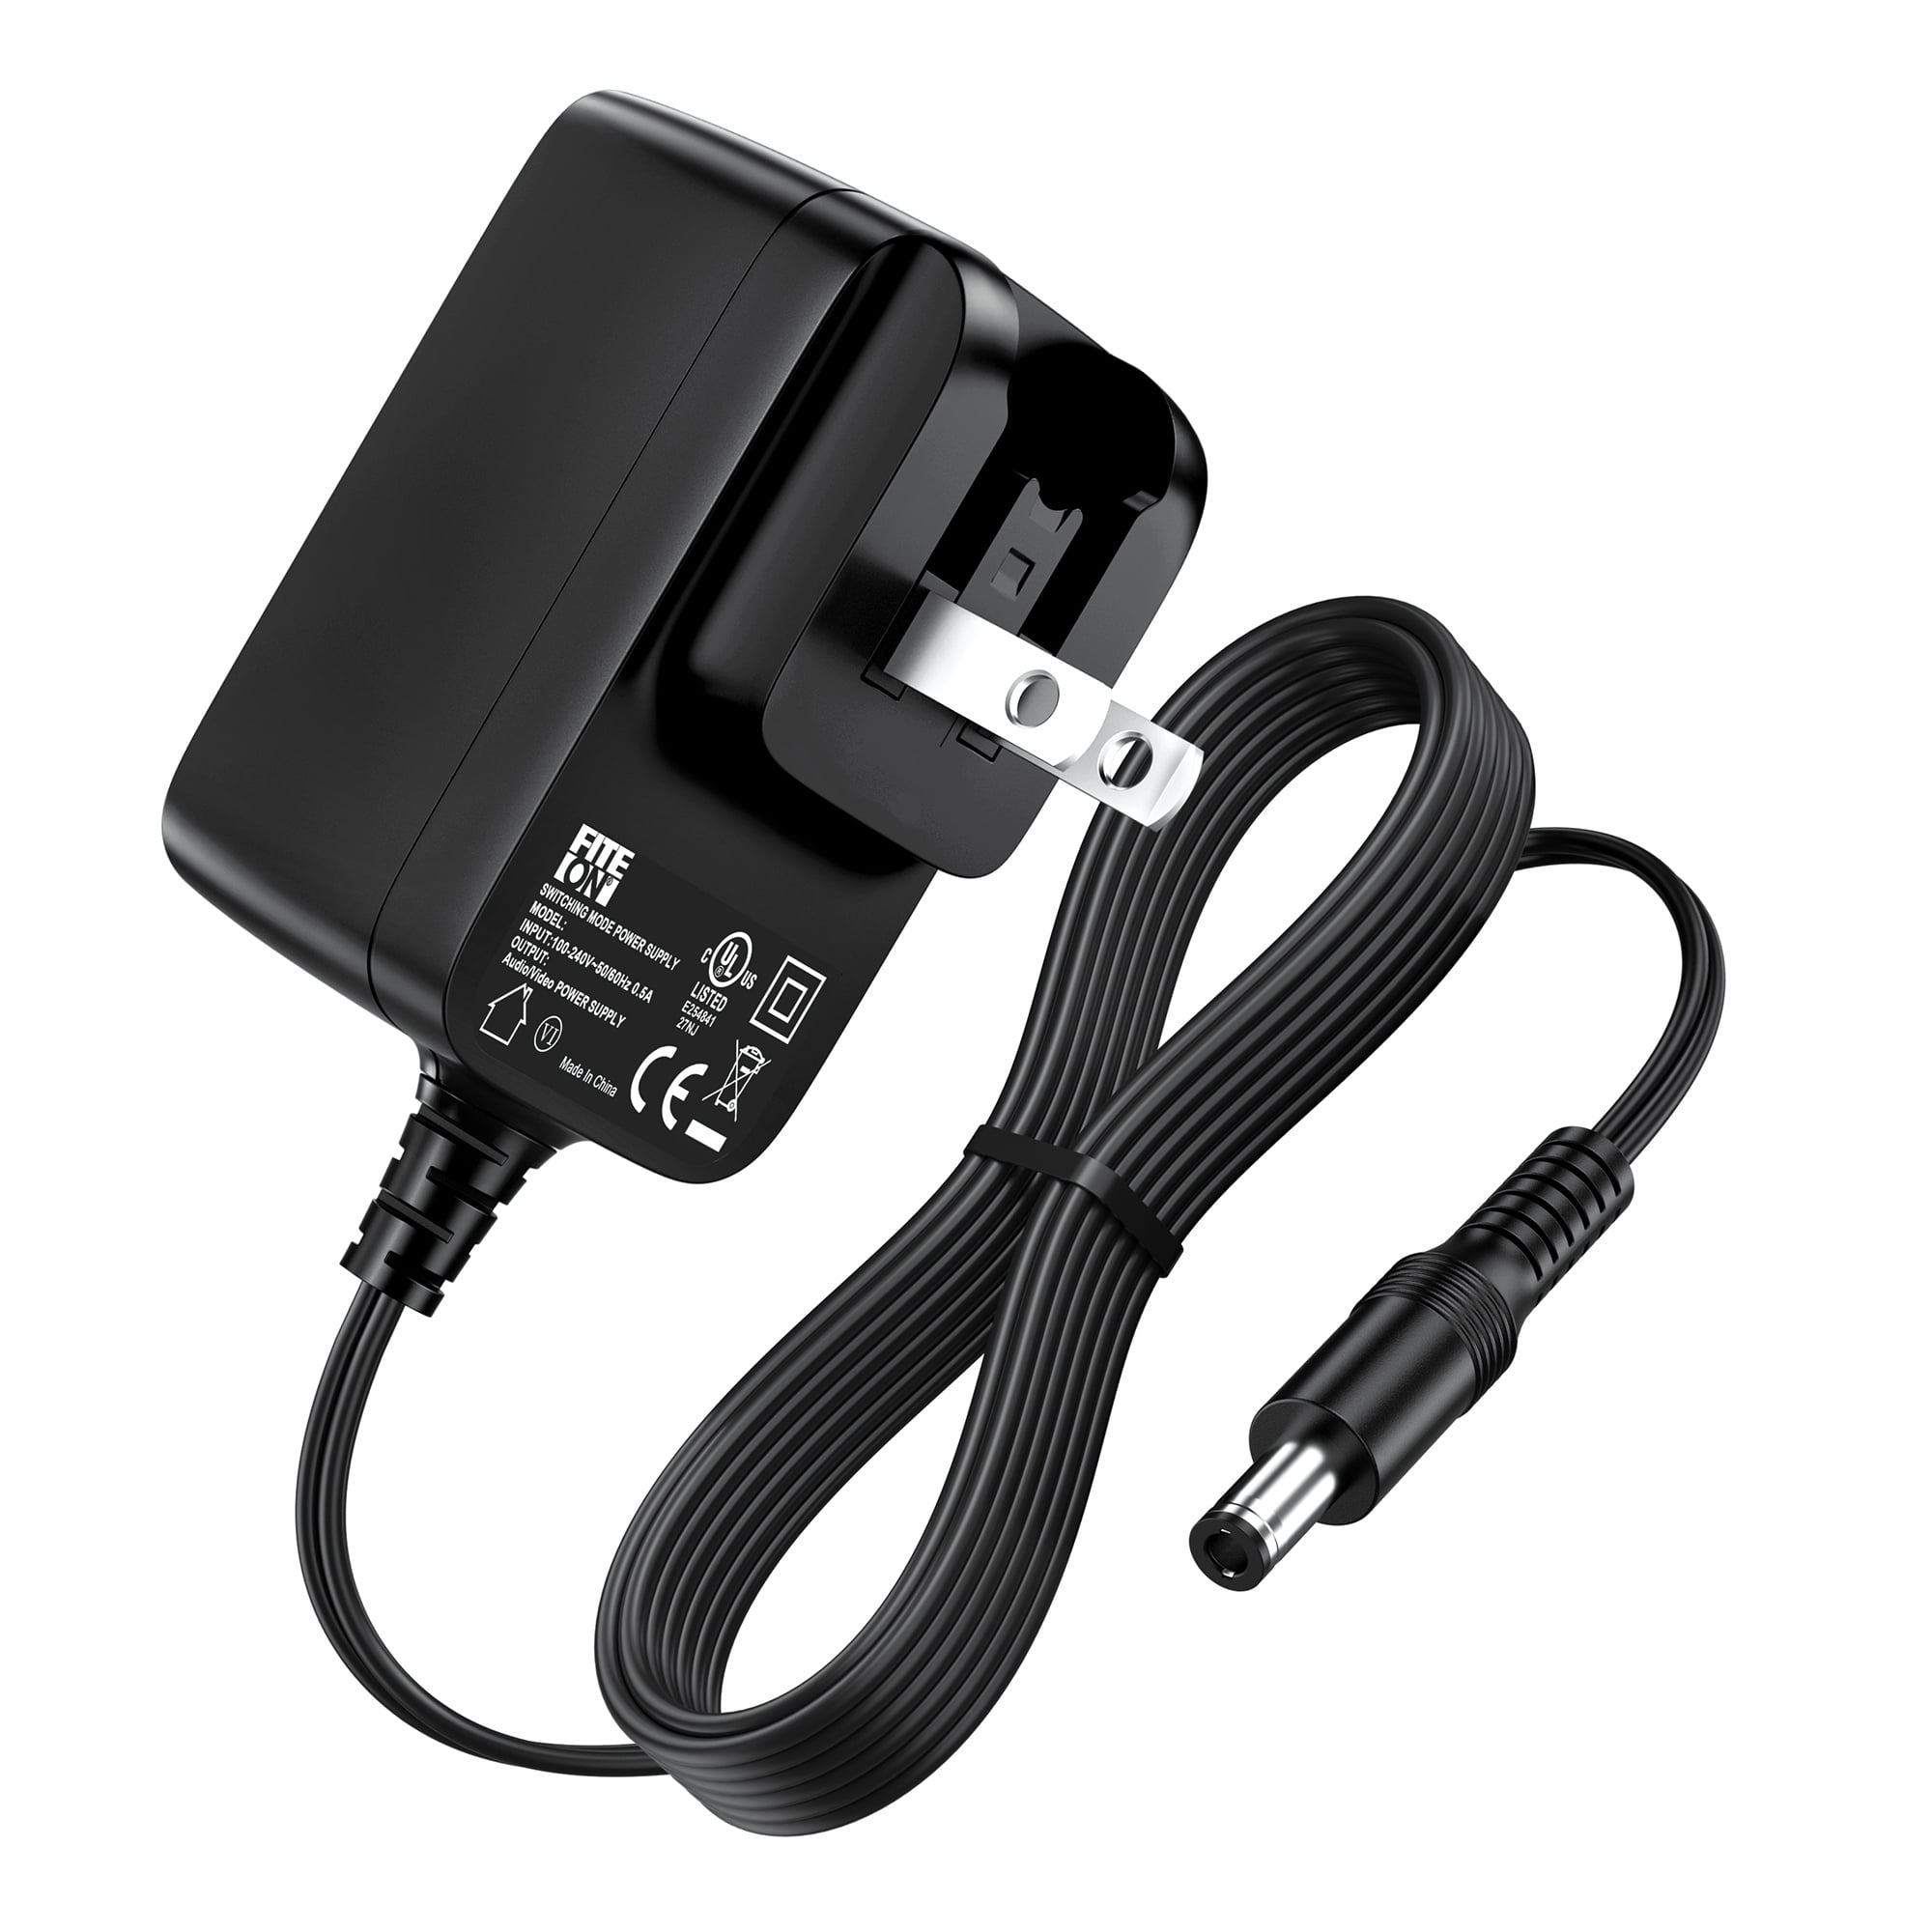 yan 12V AC DC Adapter for Netgear WGR614V7 Wireless Router Charger Power Cord PSU 